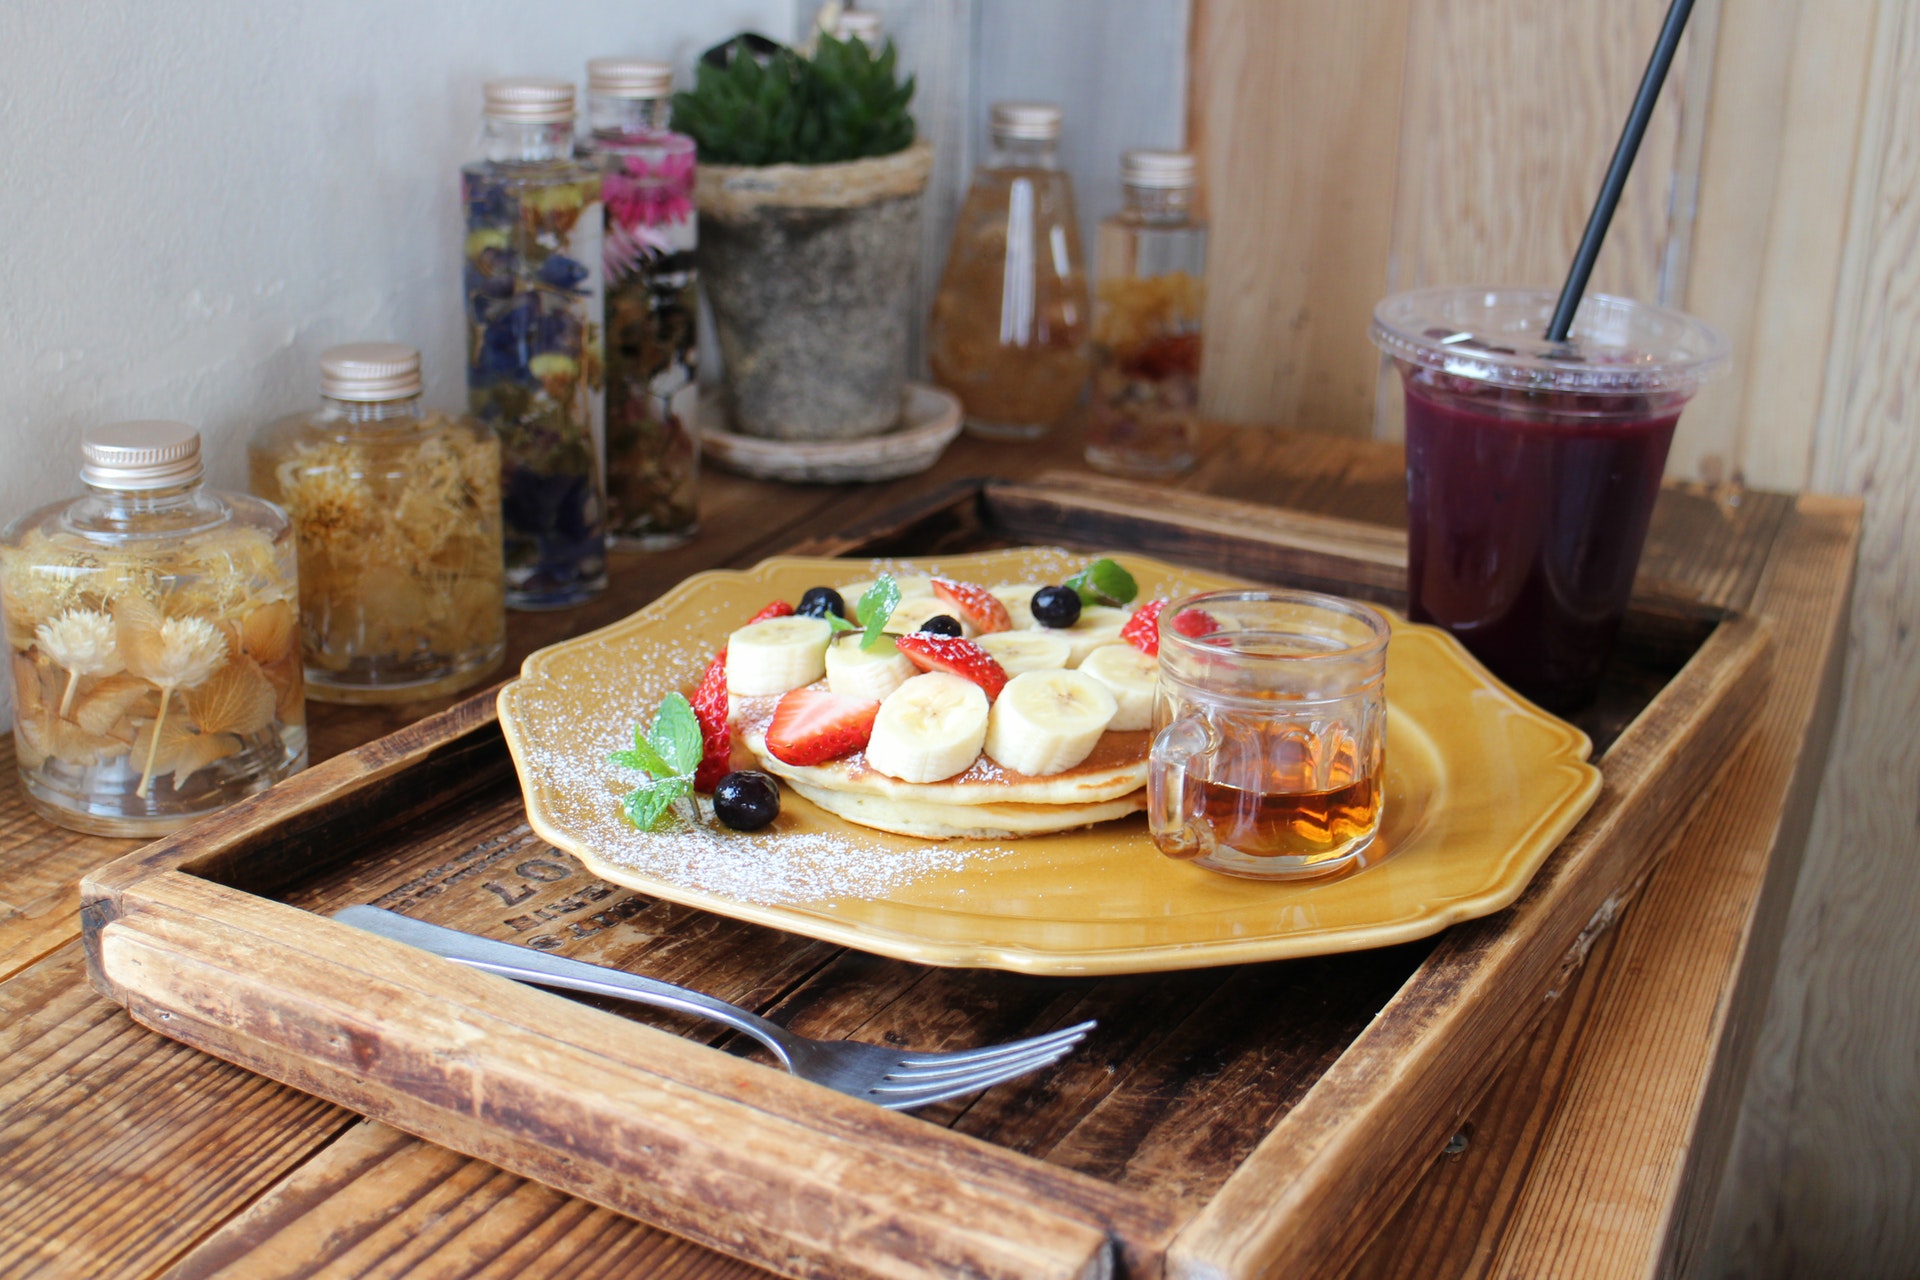 pancakes-garnished-with-fruits-next-to-a-cup-of-juice-2084706.jpg